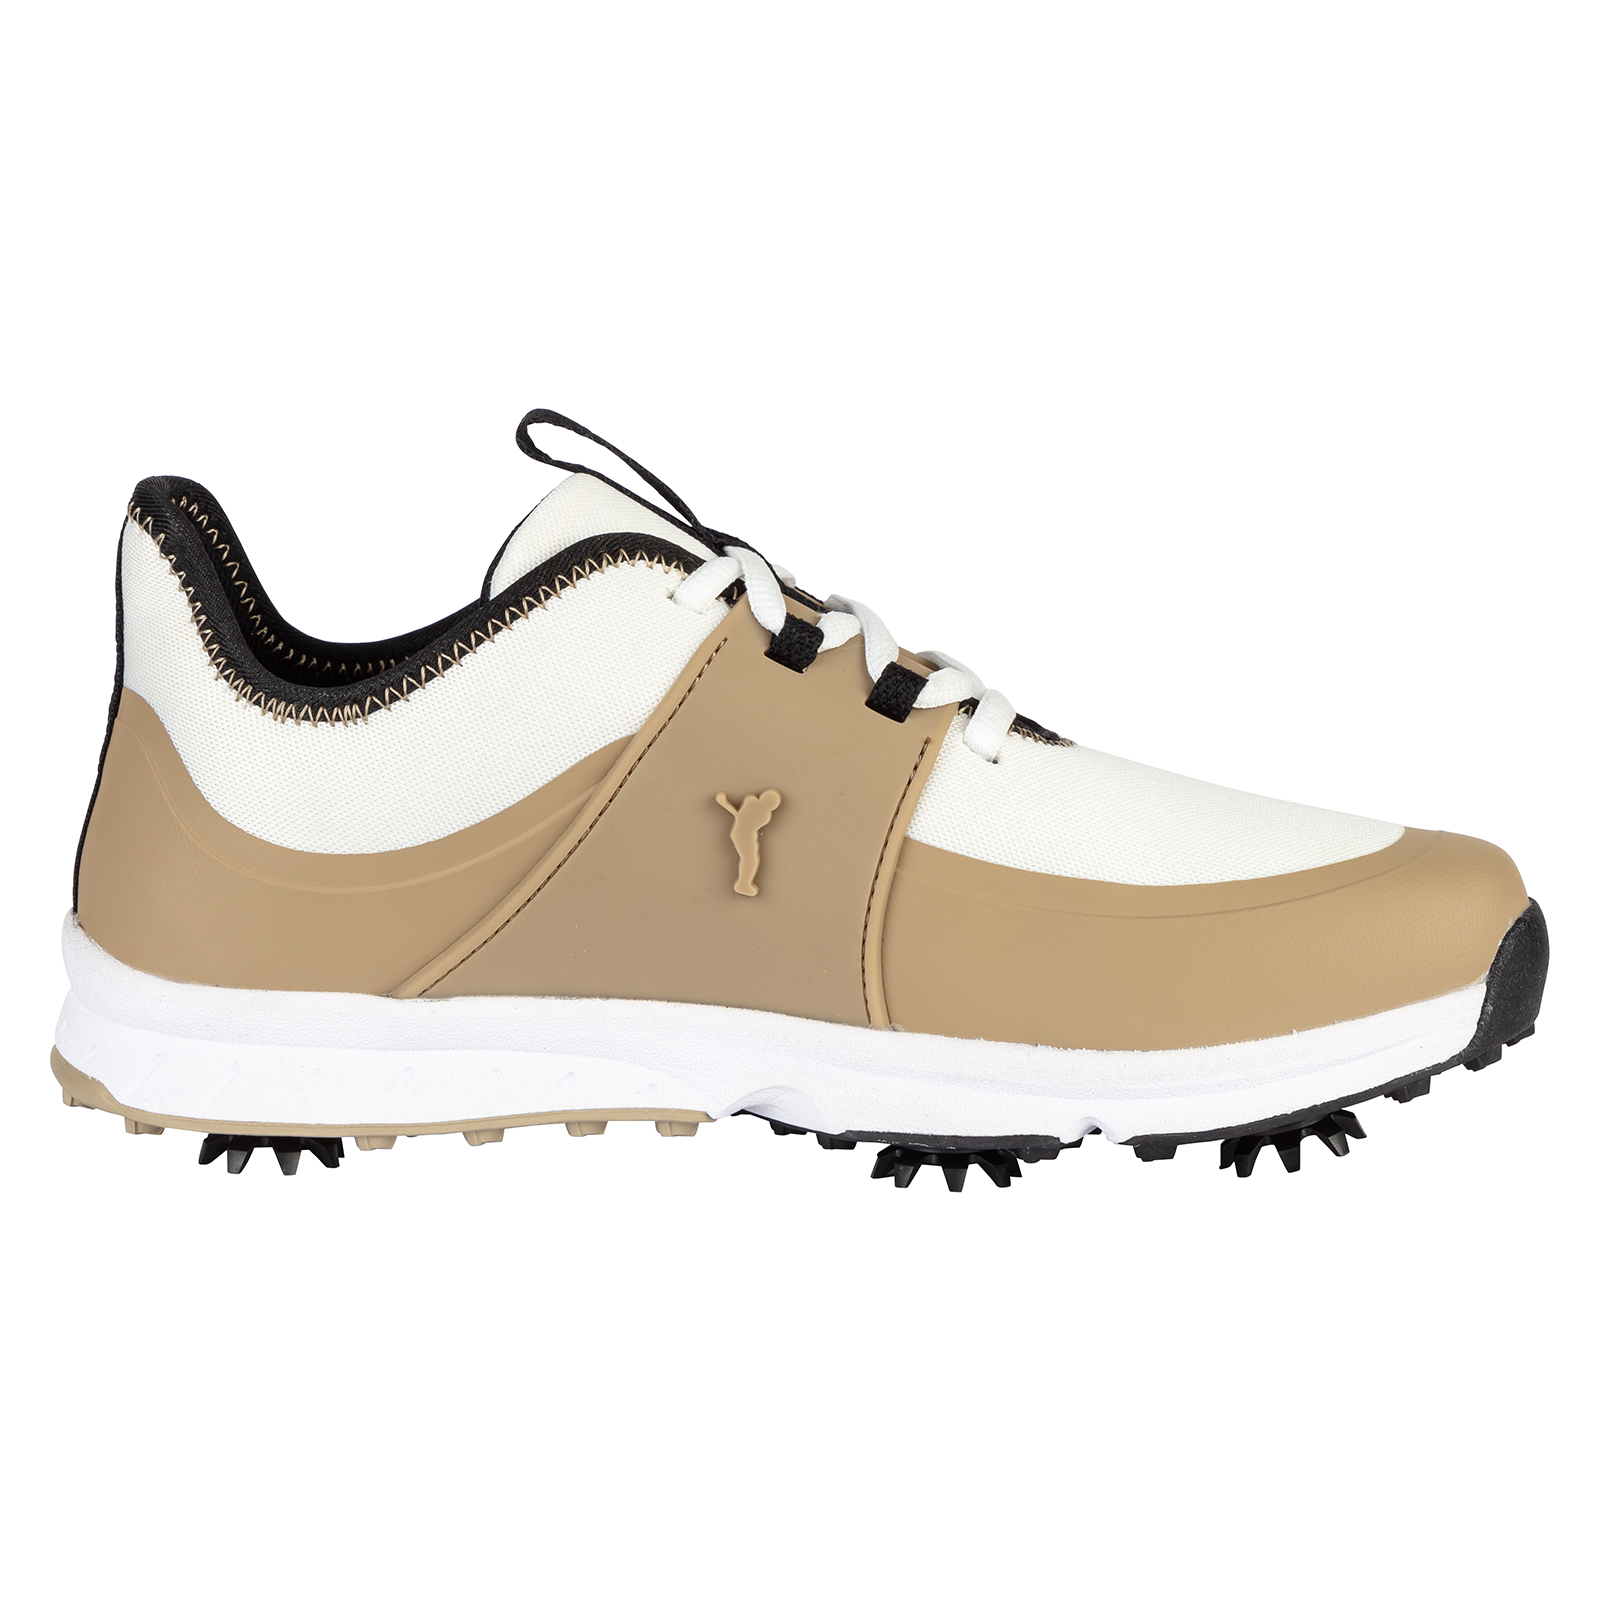 Ladies' waterproof golf shoes with removable spikes 